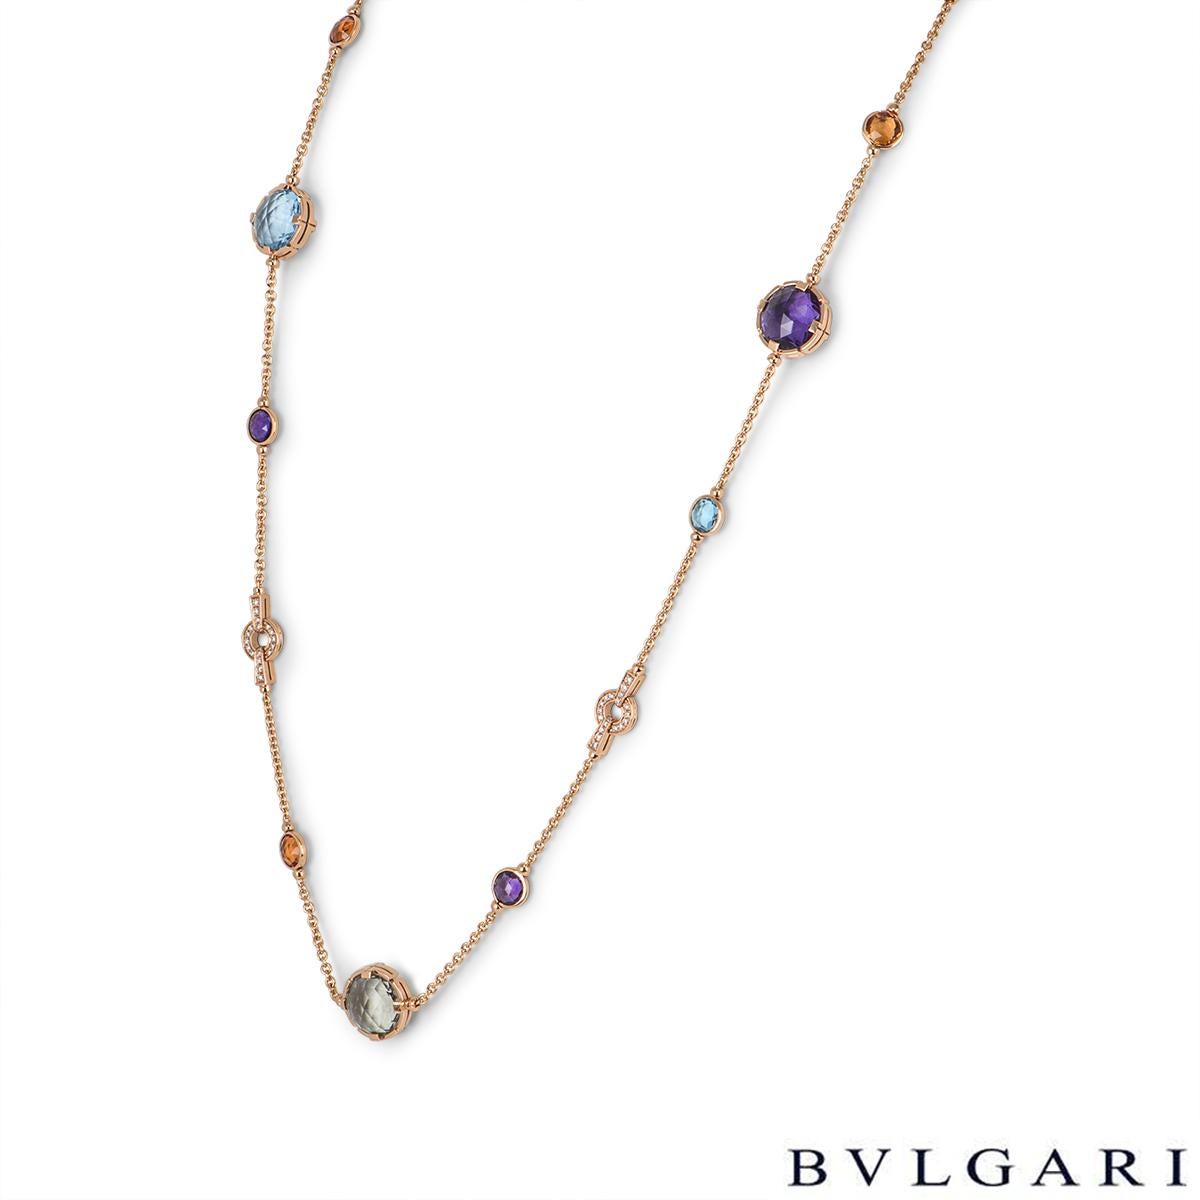 A stunning 18k rose gold diamond and multi-gem necklace by Bvlgari from the Parentesi collection. The necklace comprises of 5 round rose cut topaz stones, 5 round rose cut amethyst stones, 4 round rose cut citrine stones, 2 round rose cut green